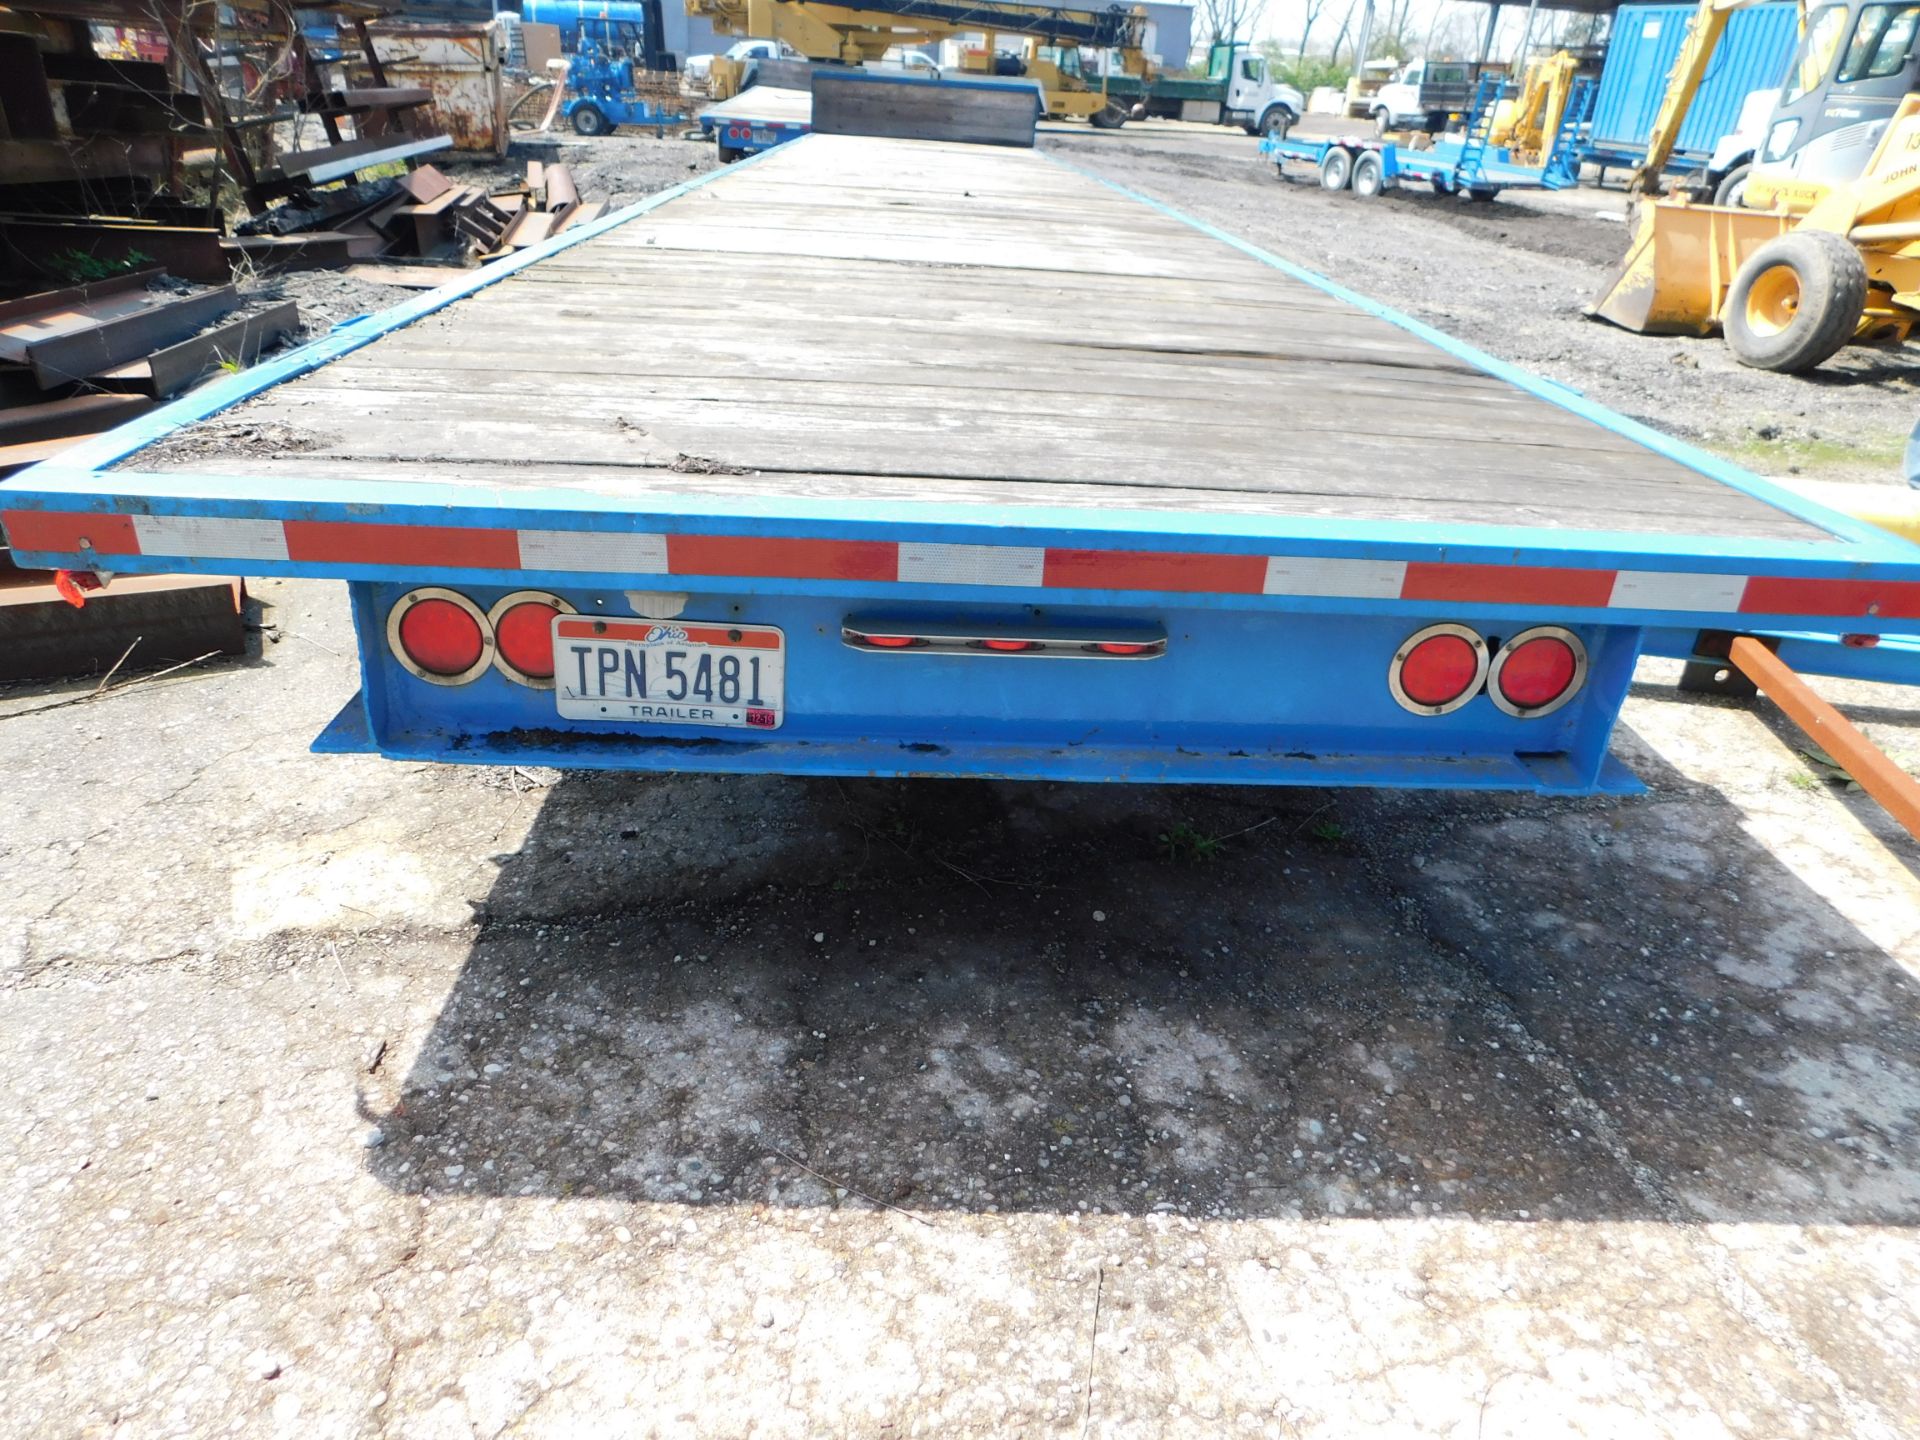 8' x 40' Flat Bed Tongue Pull Trailer, Wood Deck, Tri-Axle, 6-Wheels, Pintle Hitch - Image 5 of 13